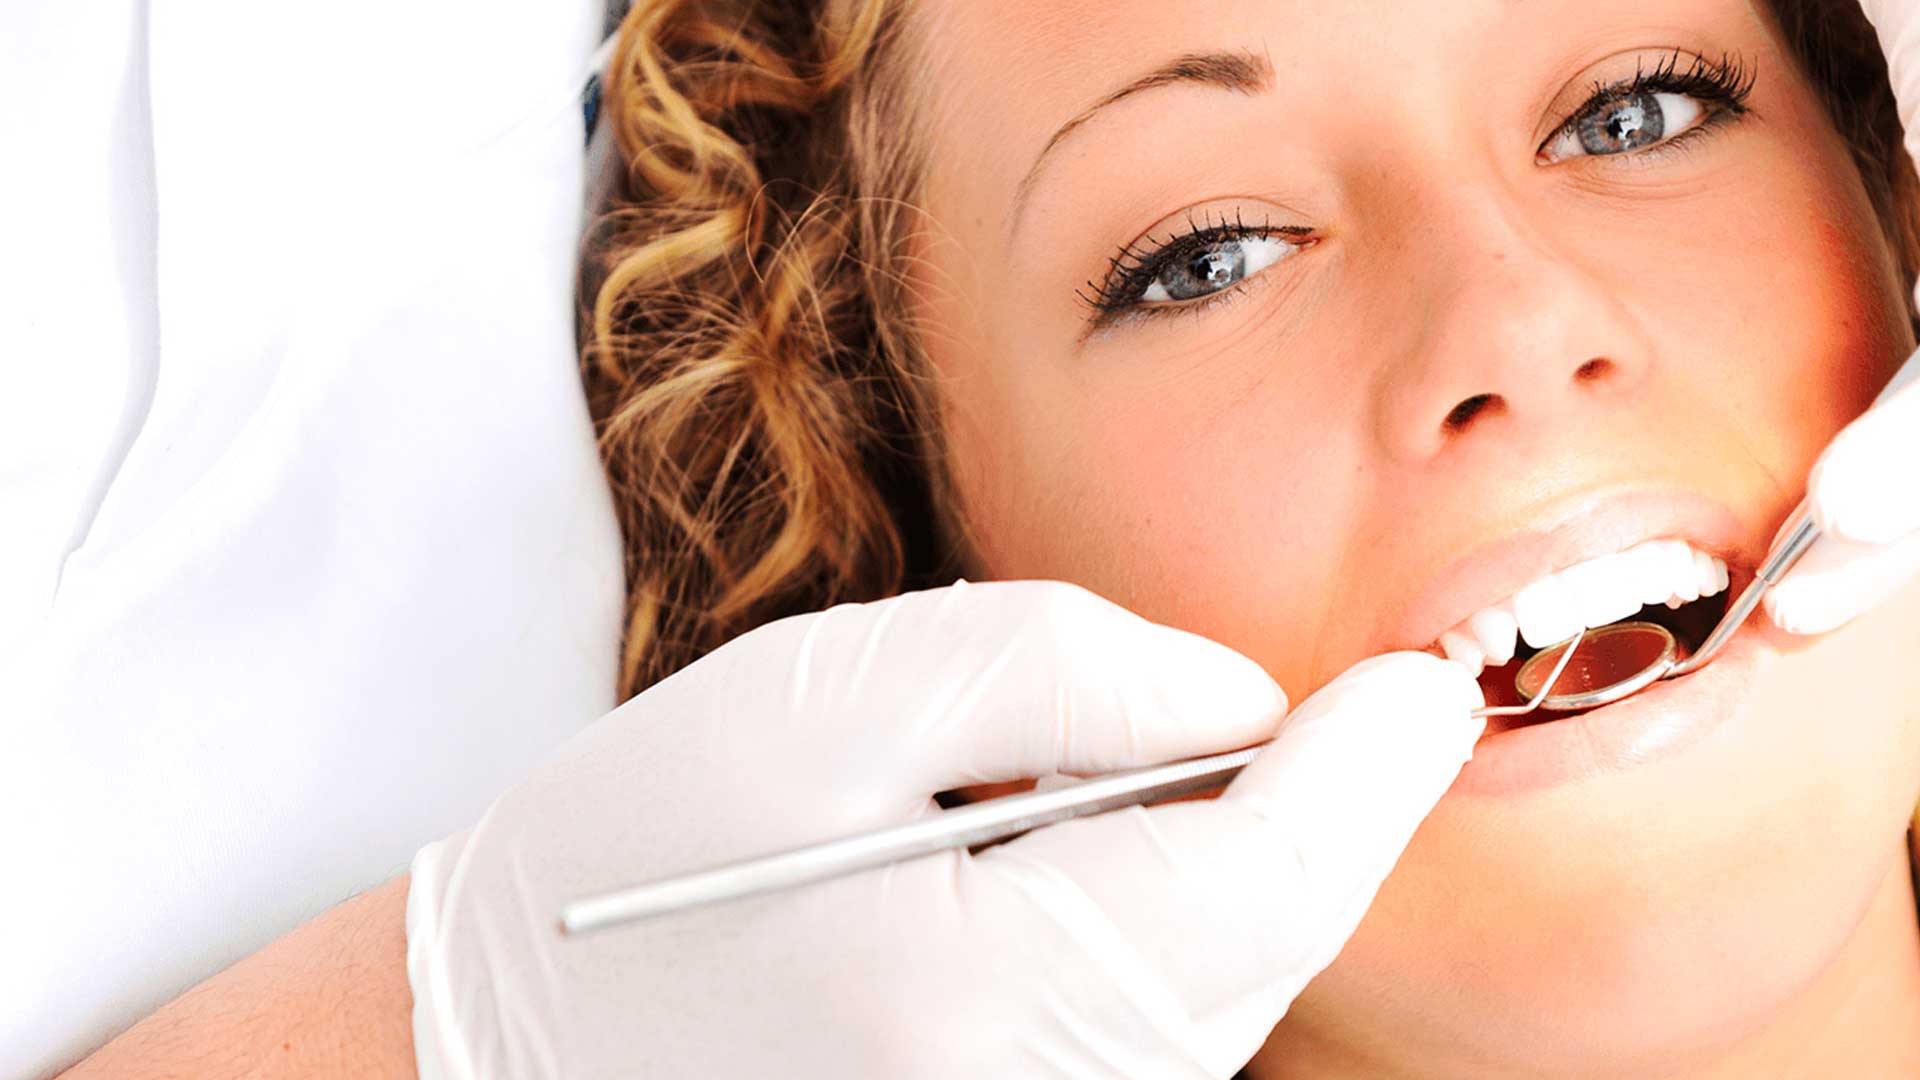 A close-up of a woman as a dentist examines her teeth